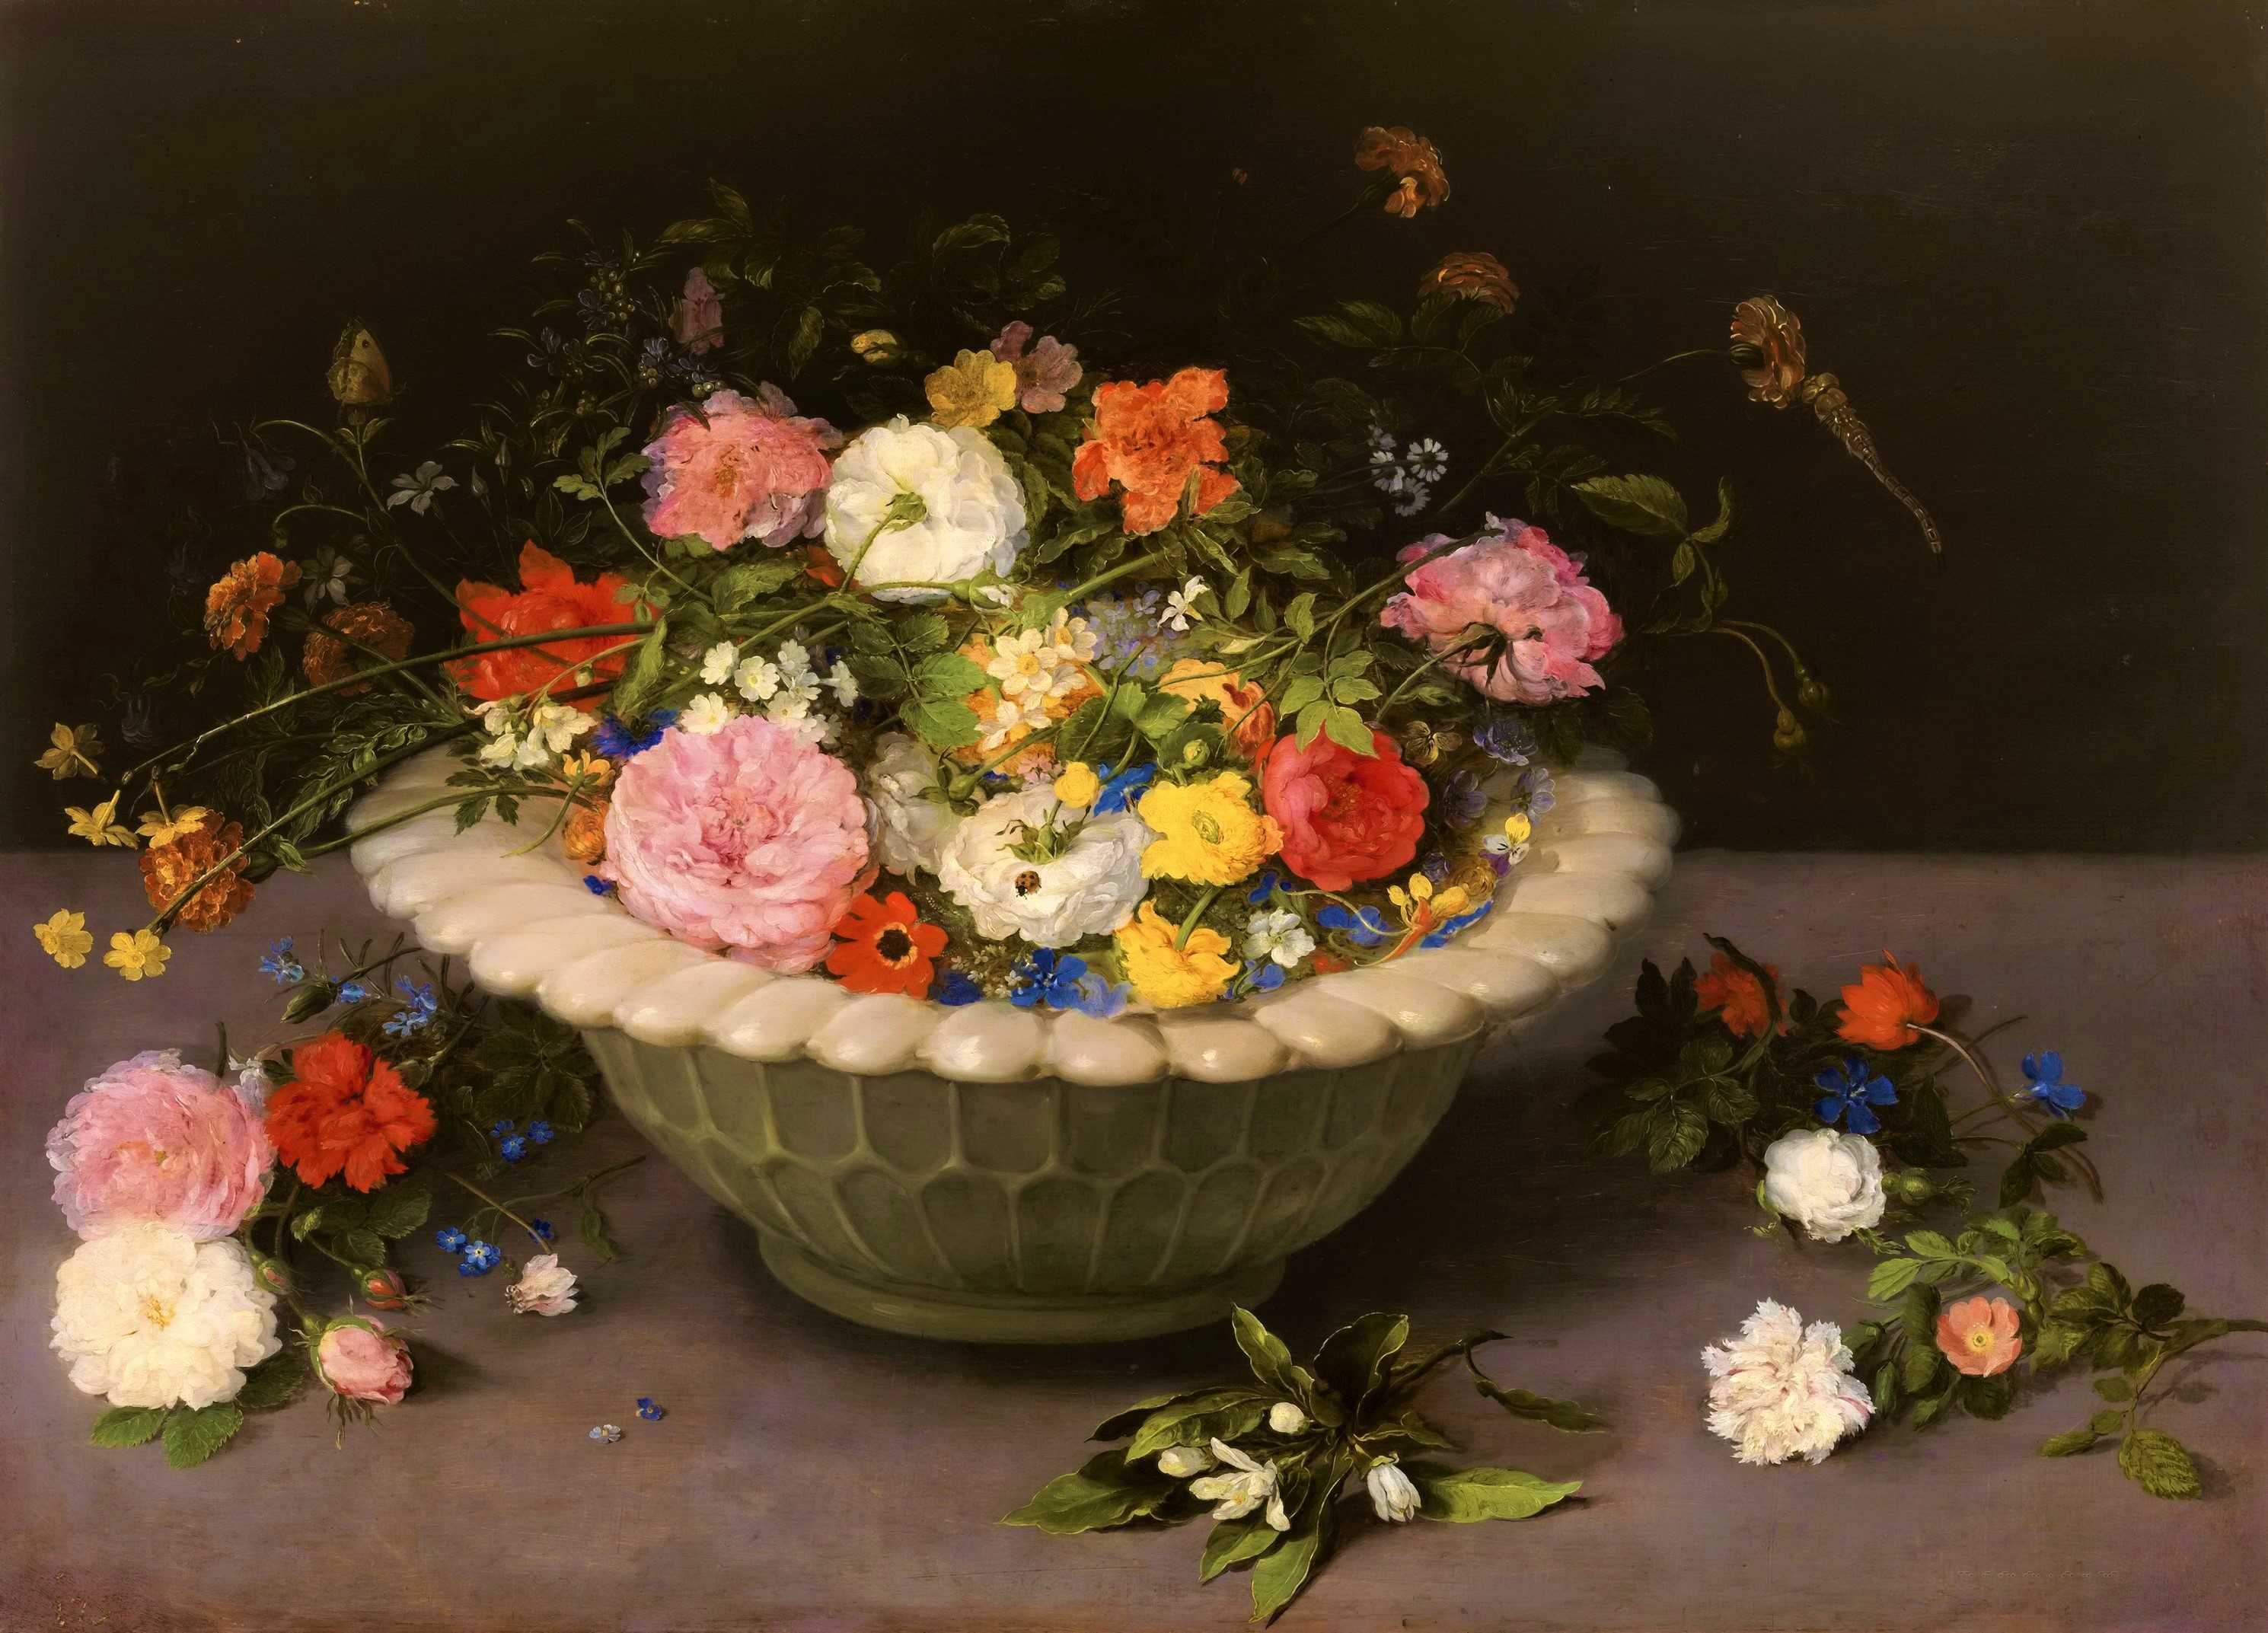 artistic, painting, bowl, colorful, flower, still life